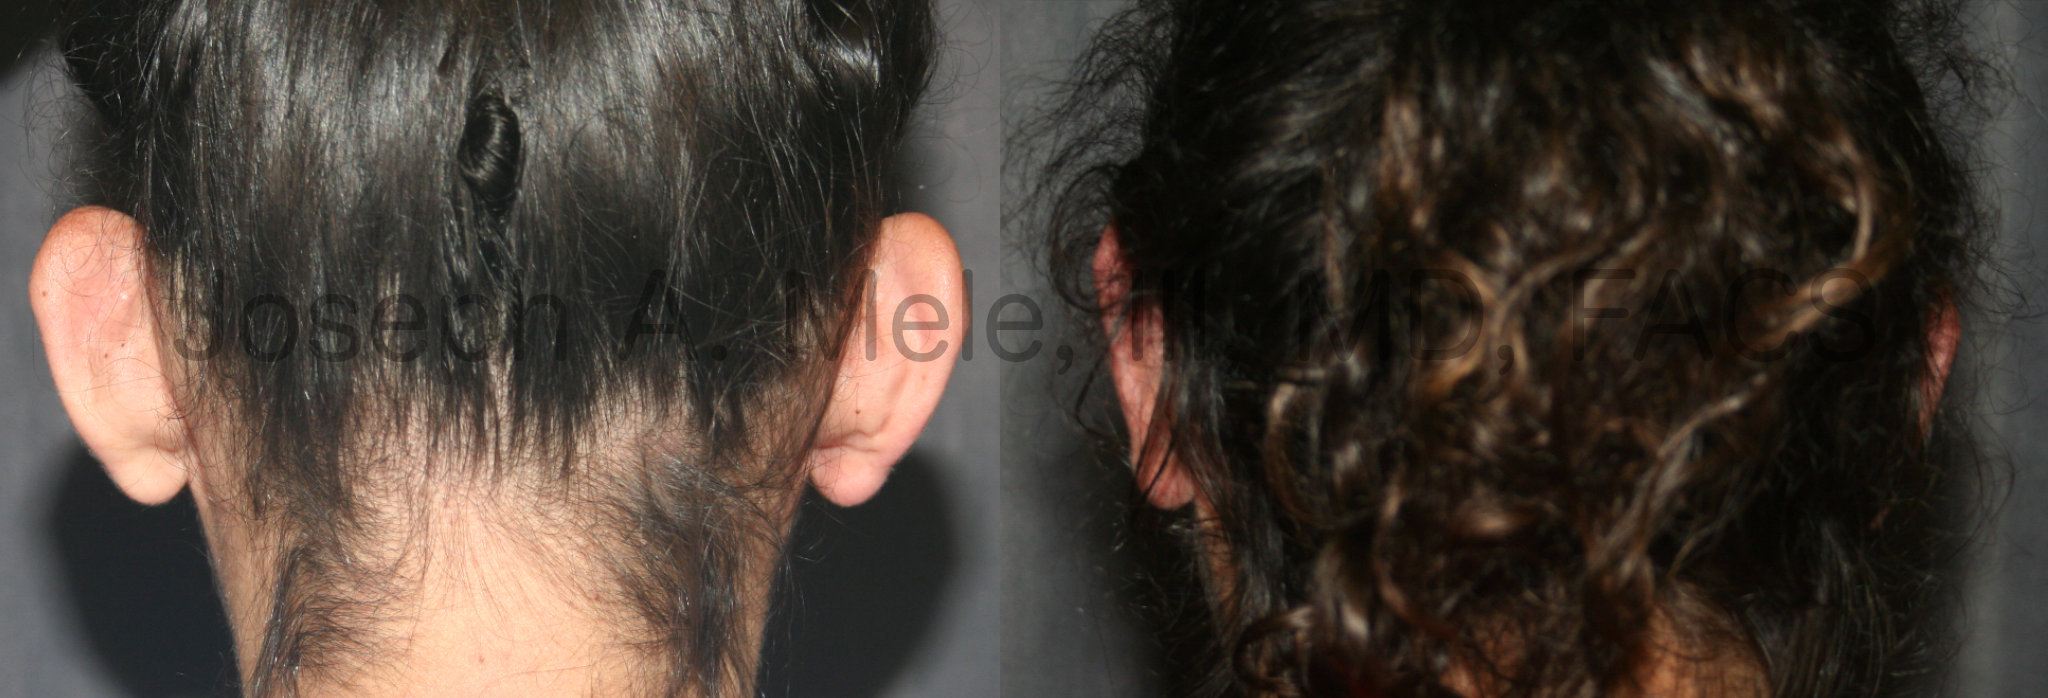 Otoplasty before and after pictures - man posterior view - prominent ear correction with plastic surgery